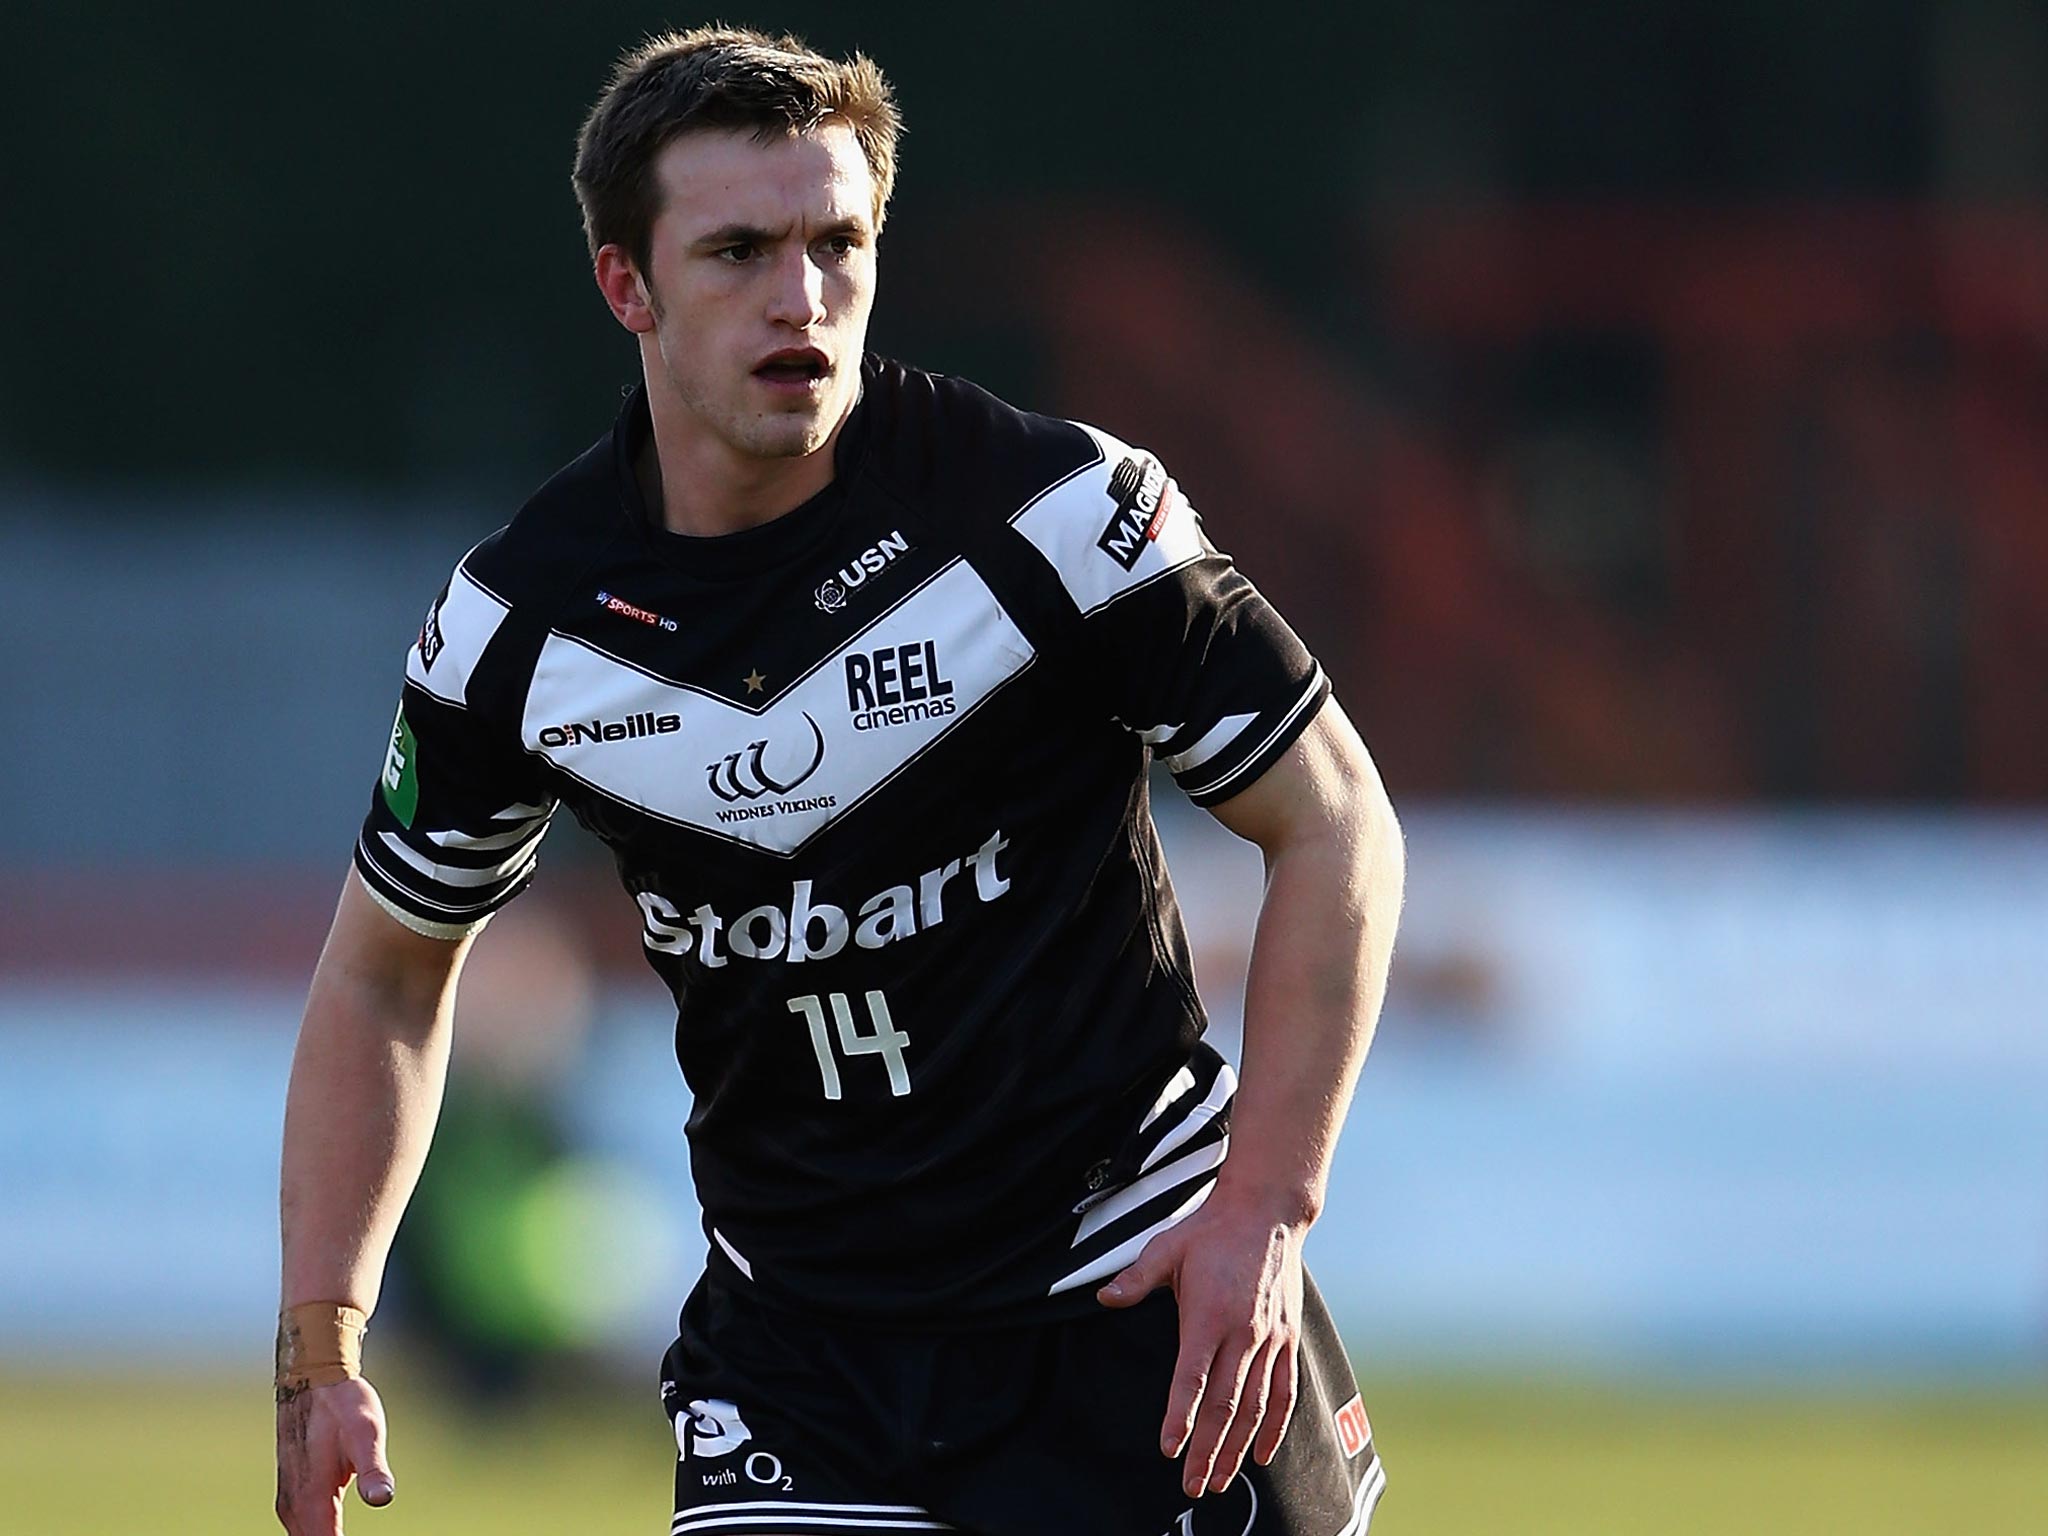 Joe Mellor shone for the Widnes Vikings on his return from injury during their victory over the Salford City Reds